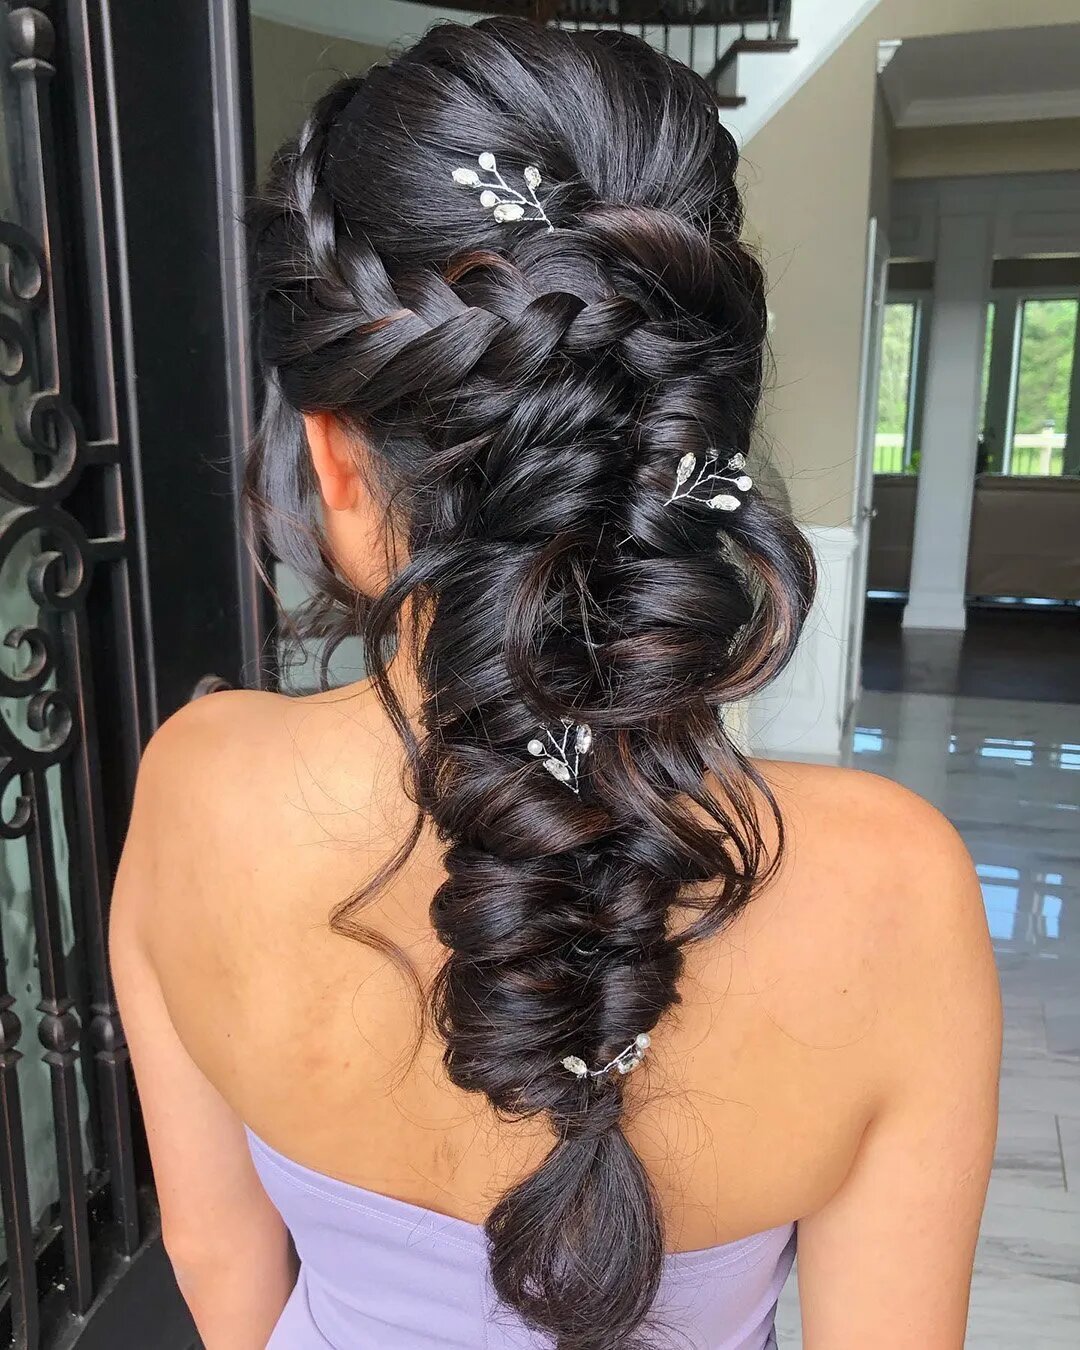 55 Latest Women Bridal Hairstyles You Should Check Out | OD9JASTYLES